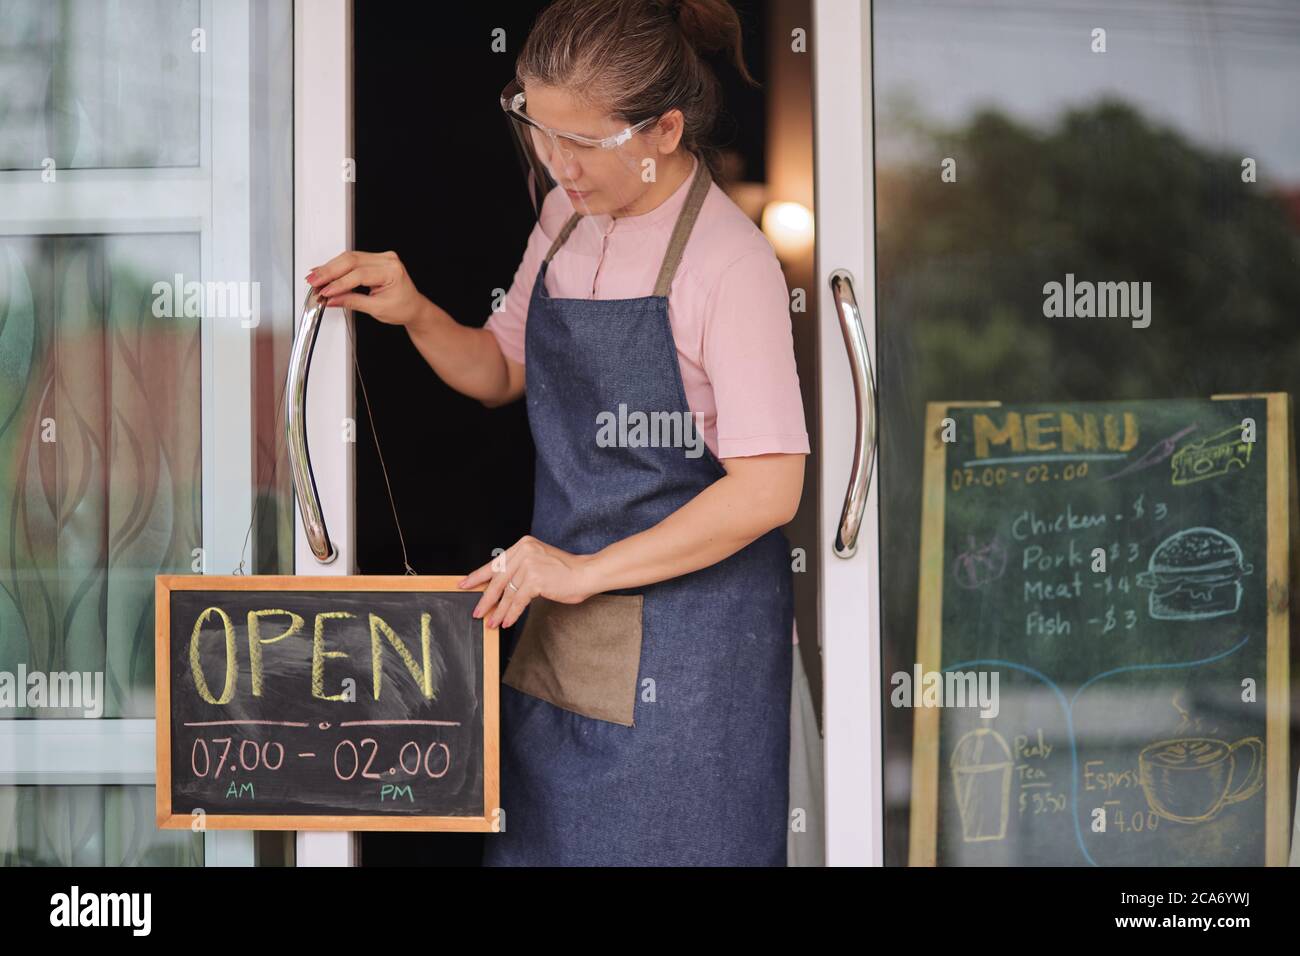 Small business back to open again during COVID-19 disease Stock Photo